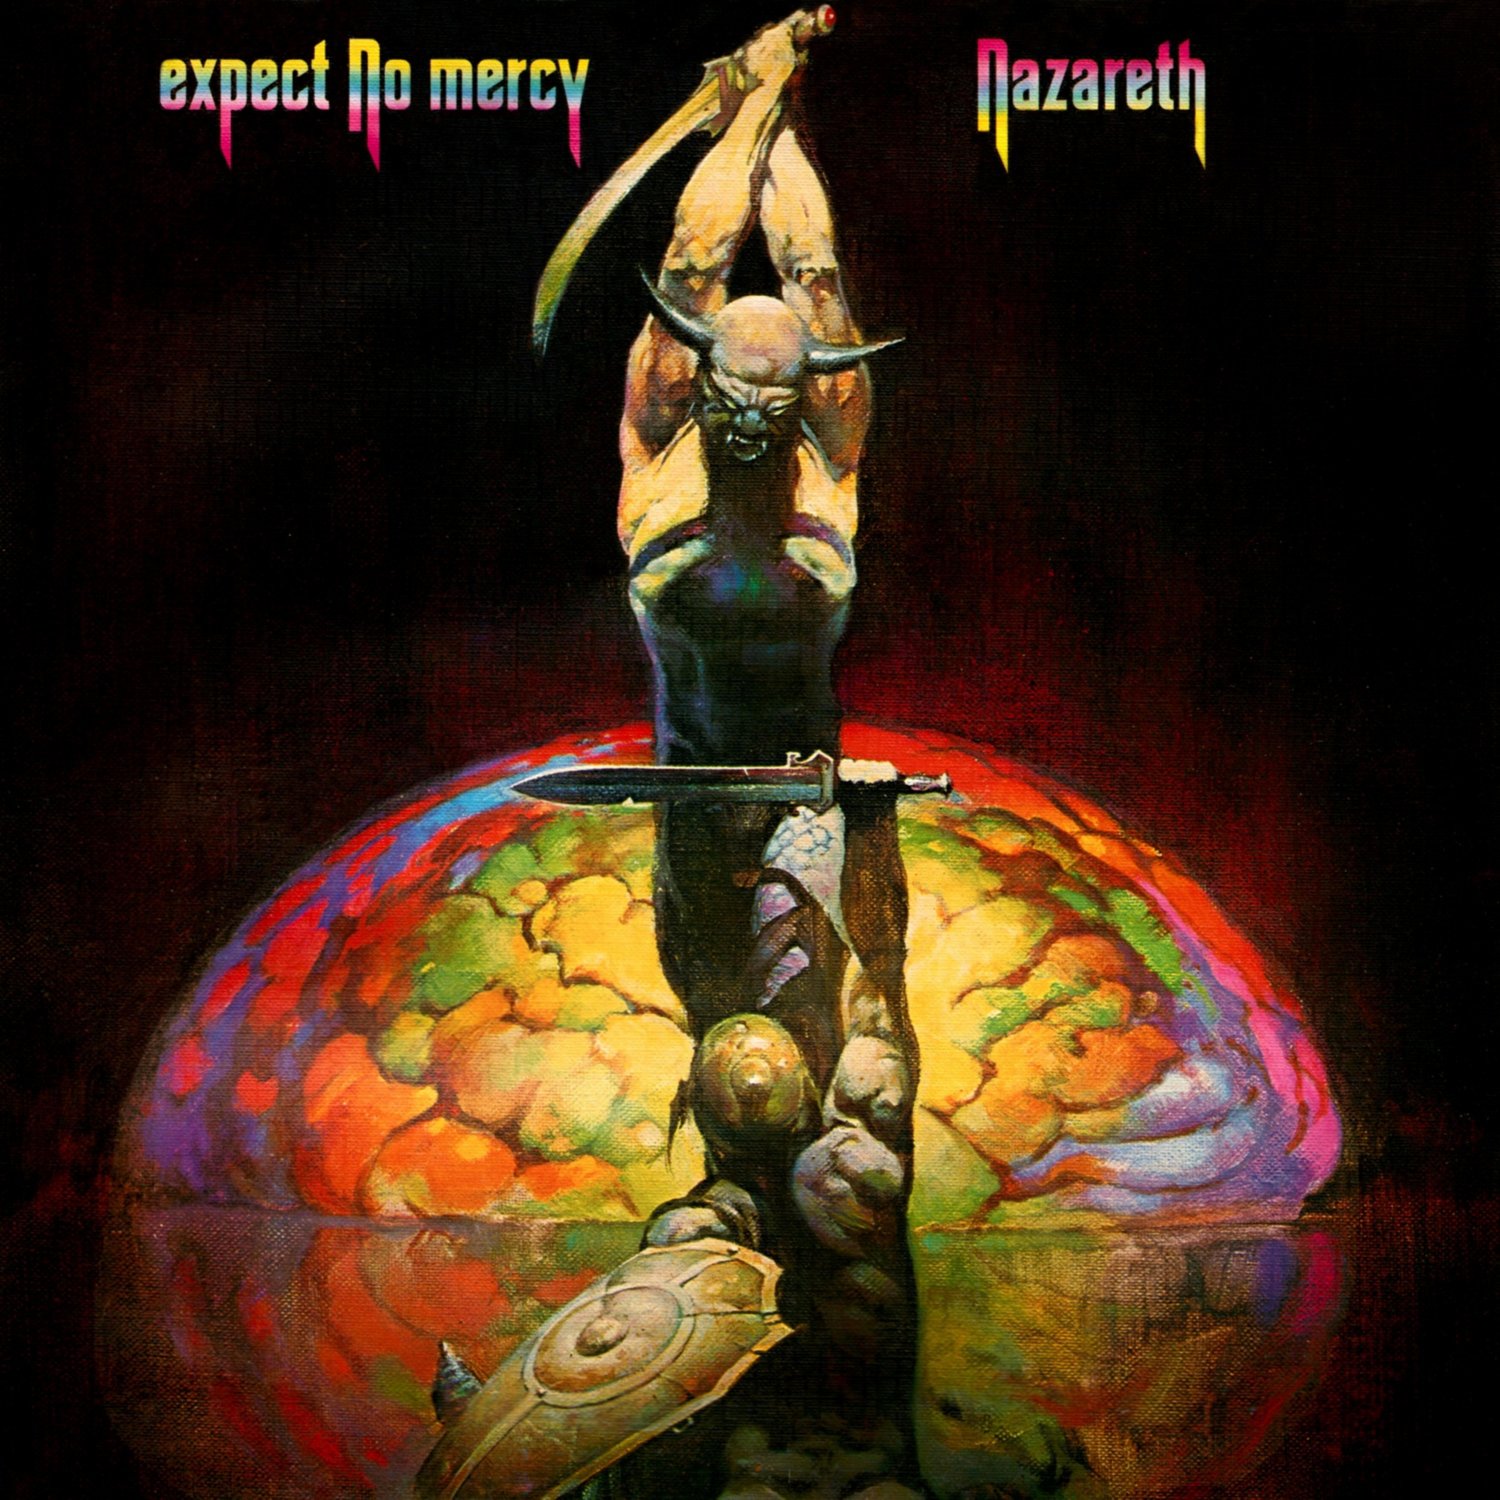 NAZARETH Expect No Mercy BANNER Huge 4X4 Ft Fabric Poster Tapestry Flag Print album cover art